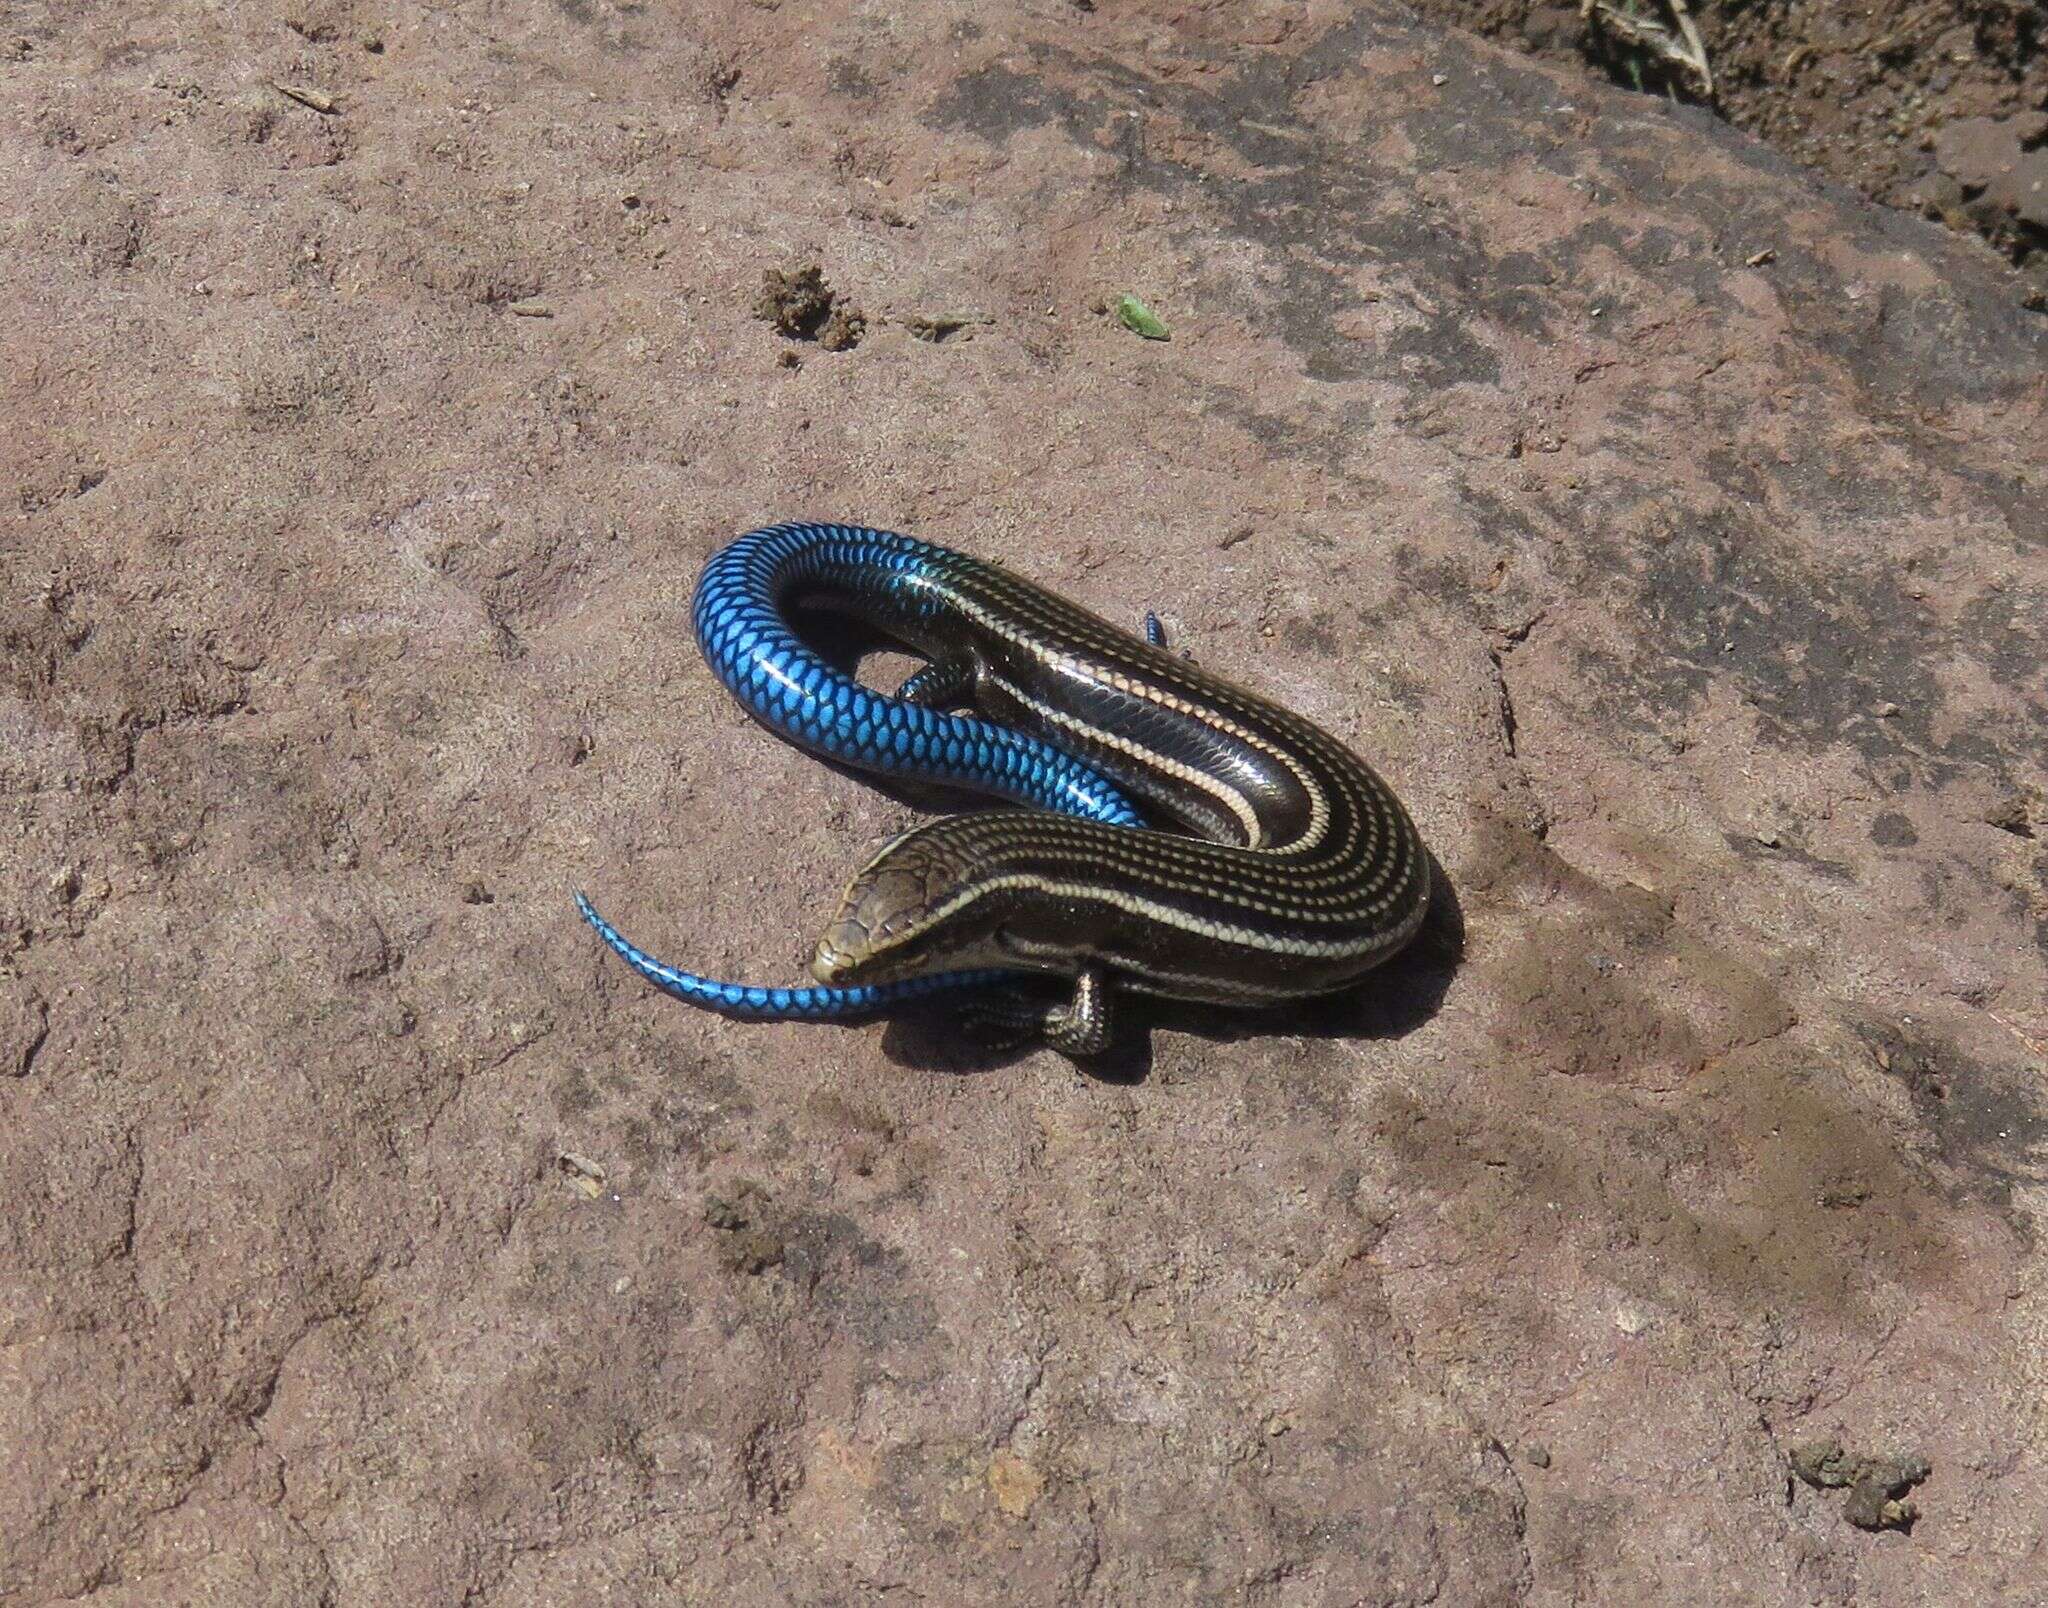 Image of Chalcides sexlineatus sexlineatus Steindachner 1891